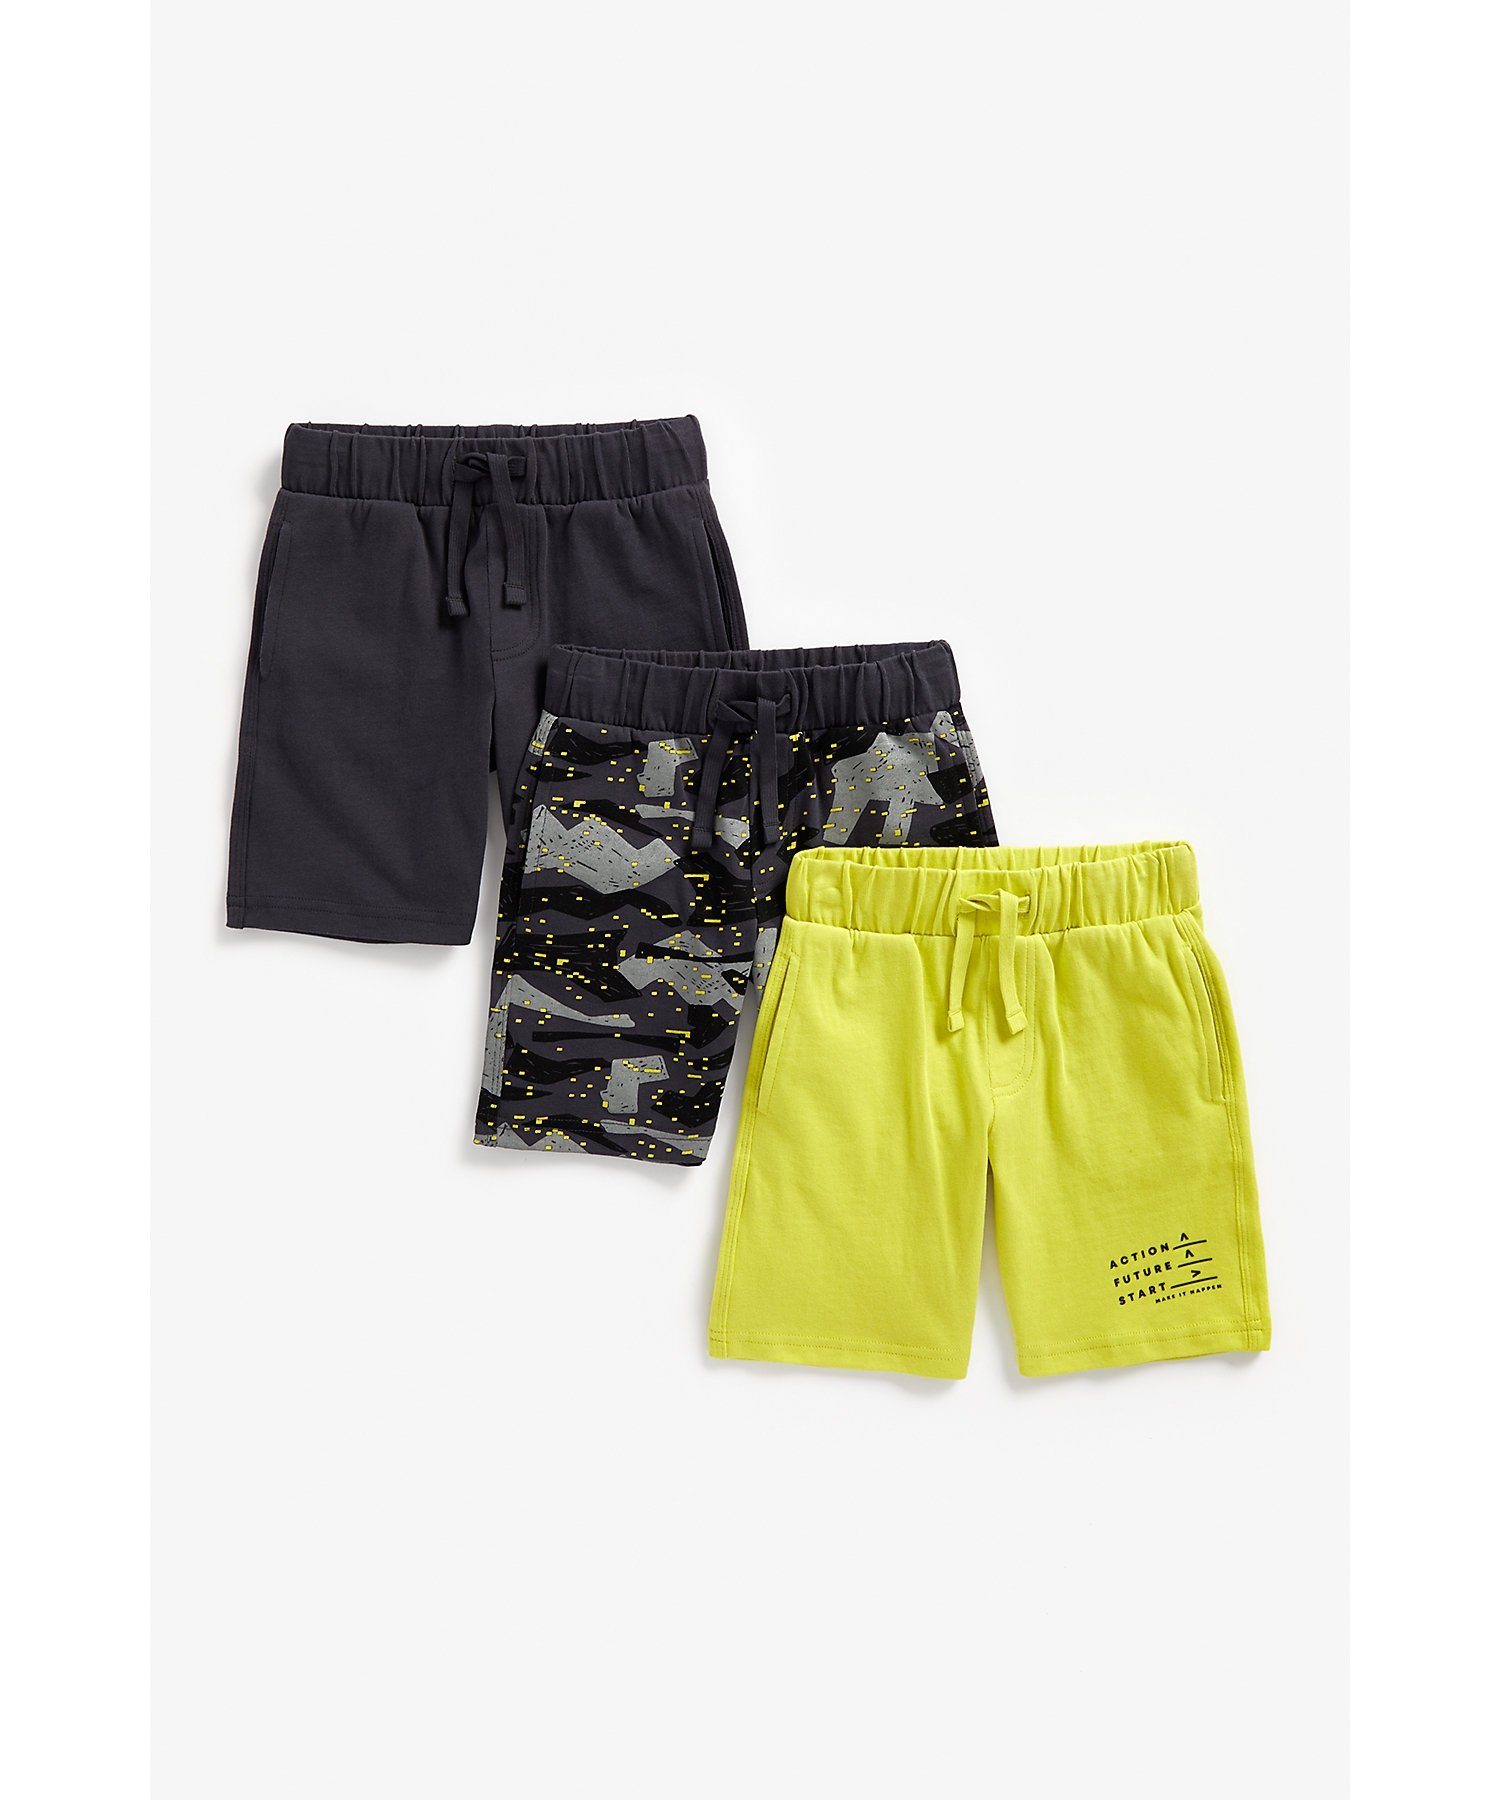 Boys Shorts -Pack of 3-Multicolor